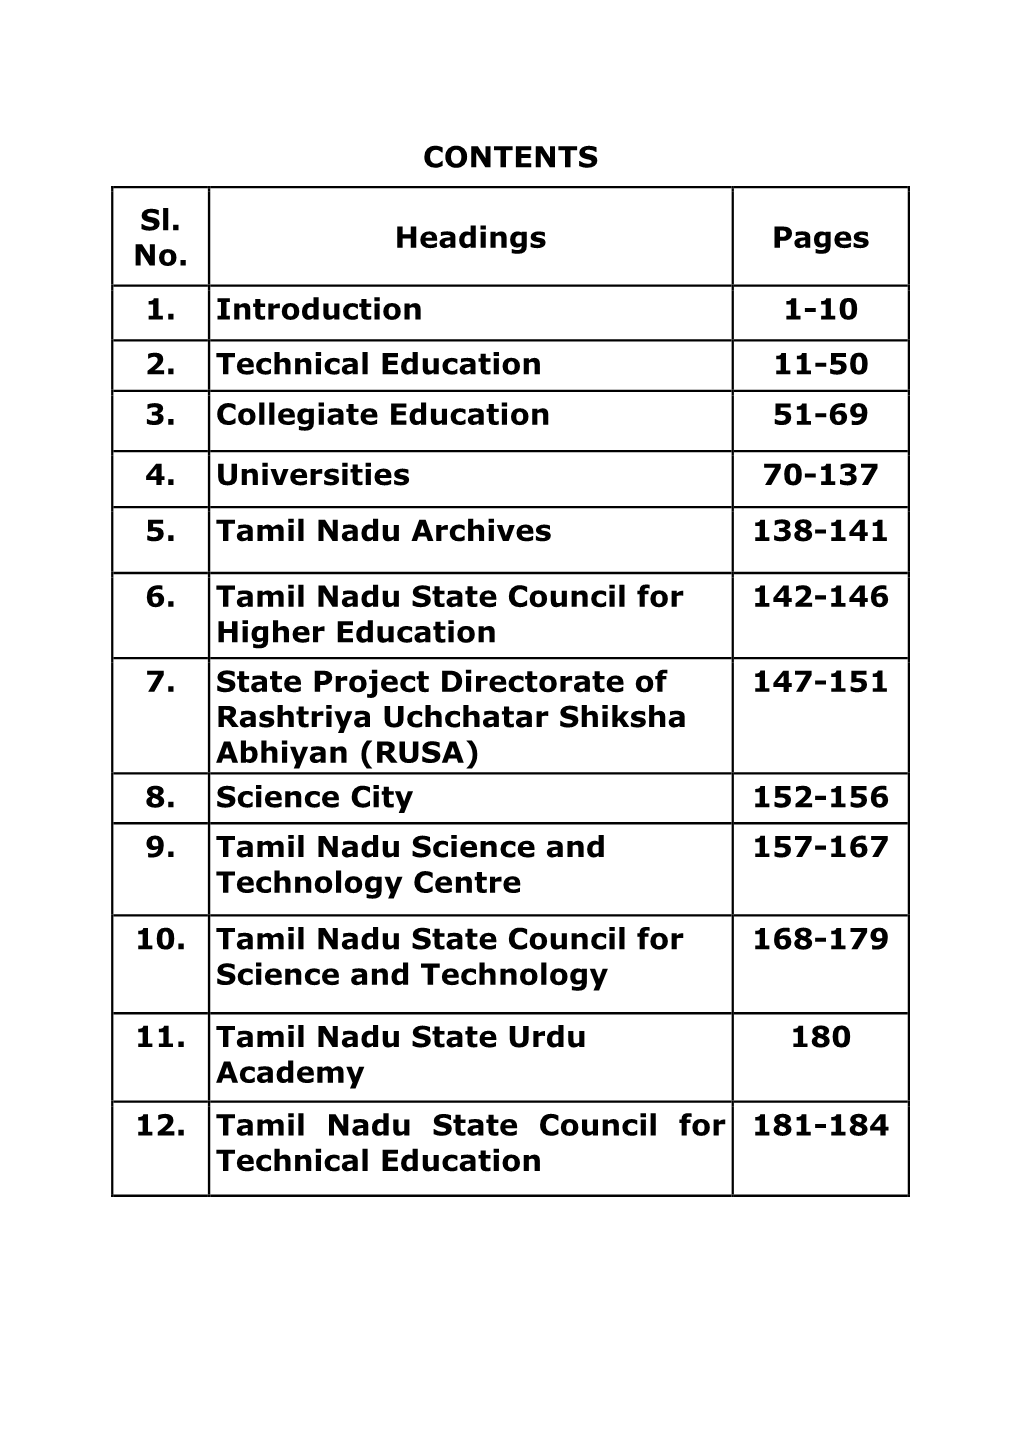 CONTENTS Sl. No. Headings Pages 1. Introduction 1-10 2. Technical